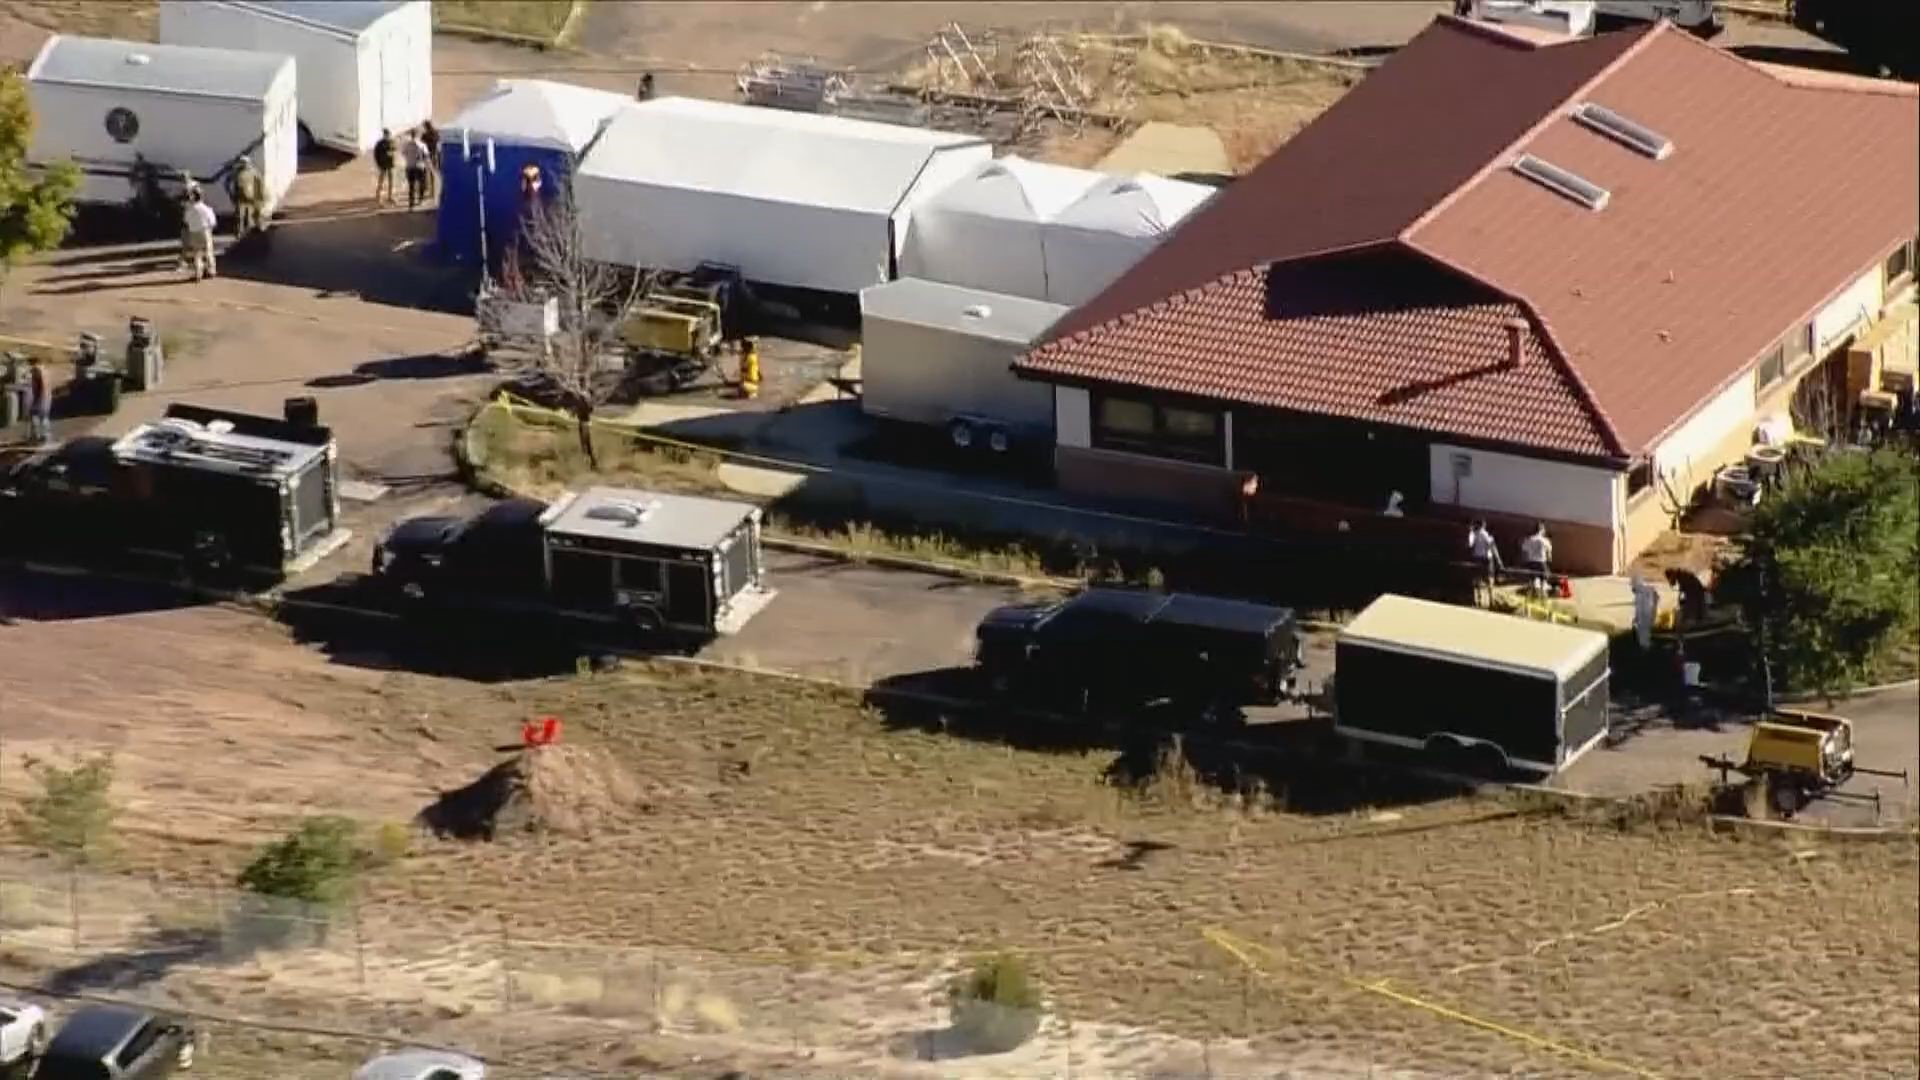 The Fremont County coroner, with the assistance of the FBI, has started removing more than 115 bodies from Return to Nature funeral home in Penrose.